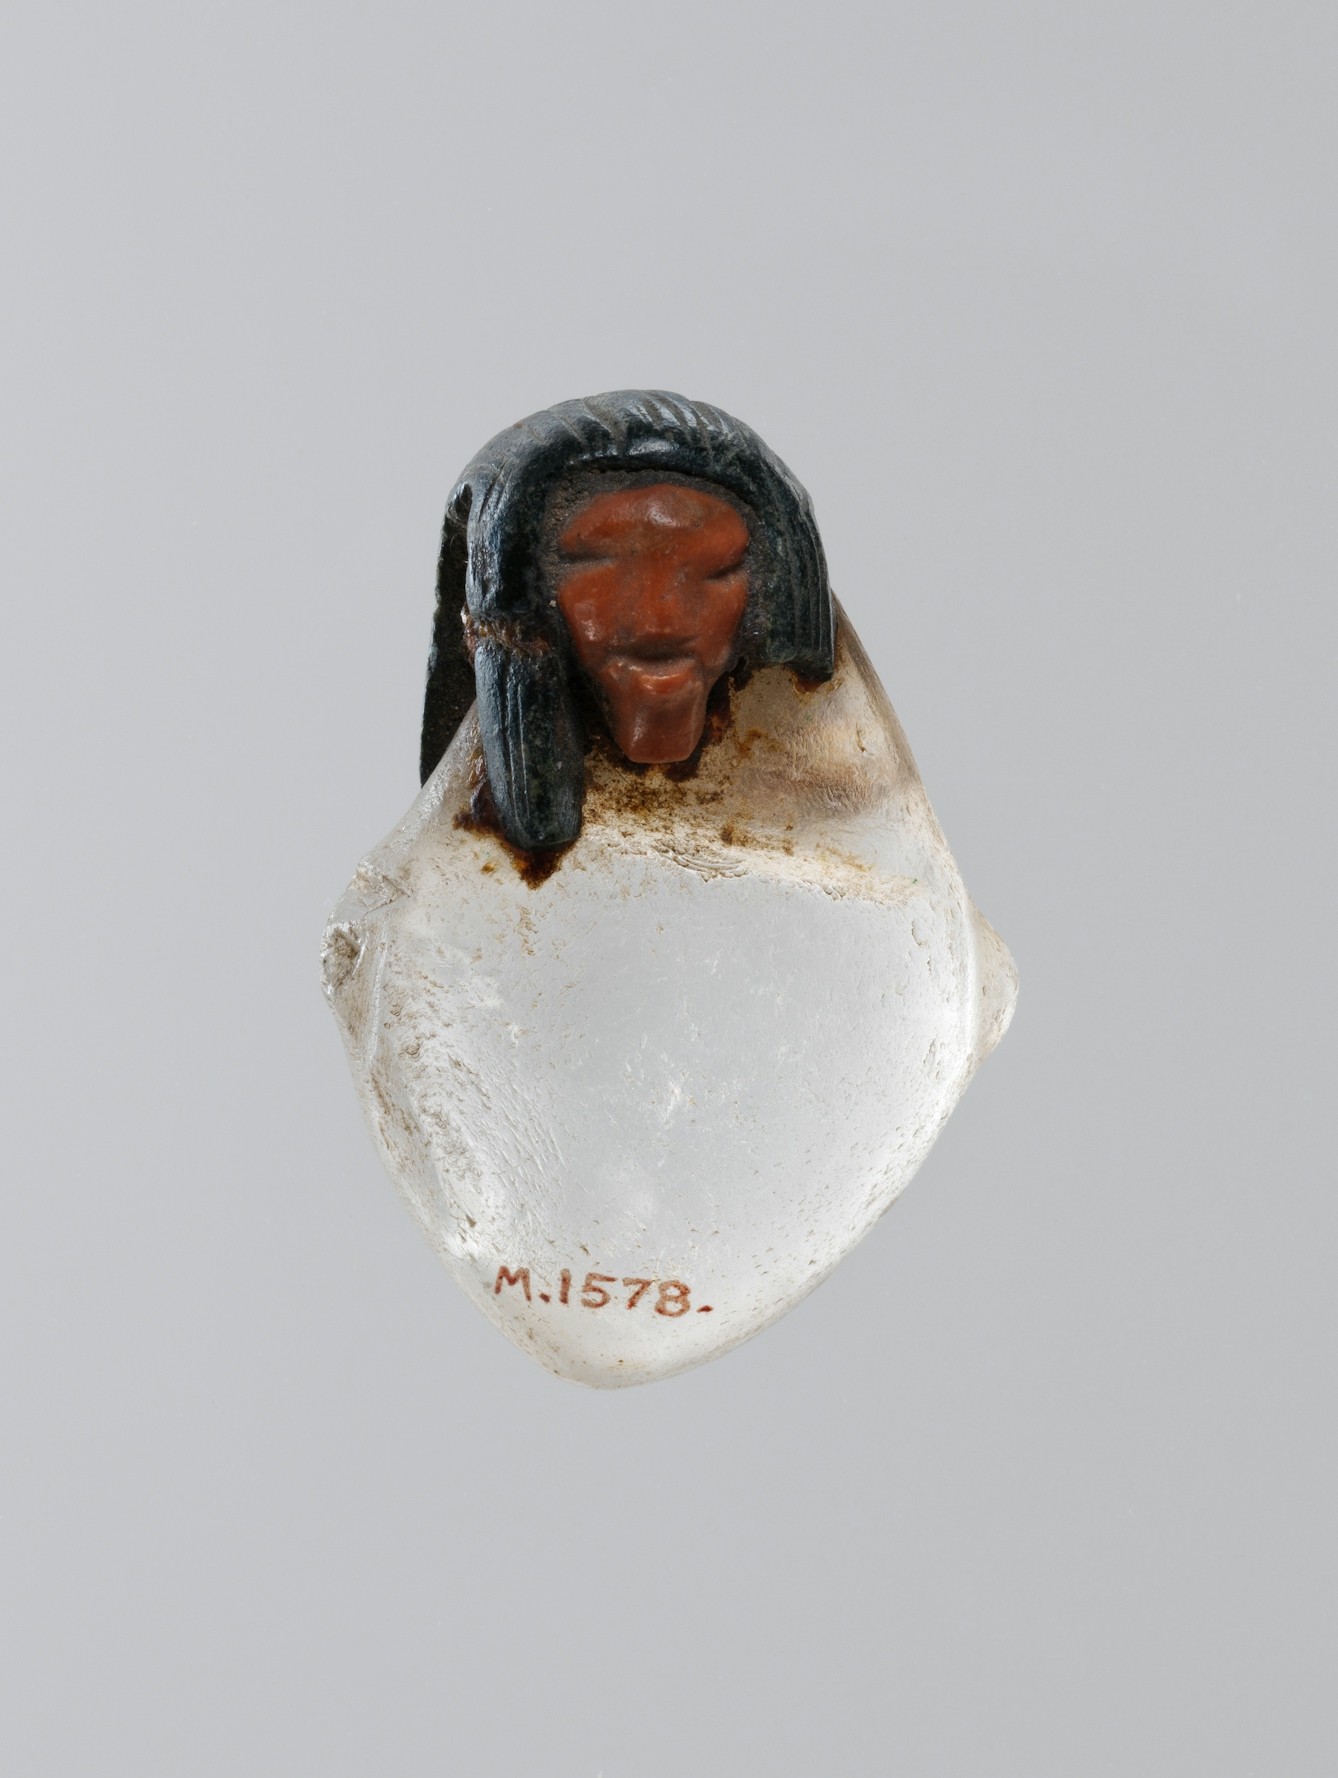 Photograph of a heart shaped amulet with a carved human head, made out of rock crystal, set against a grey background.